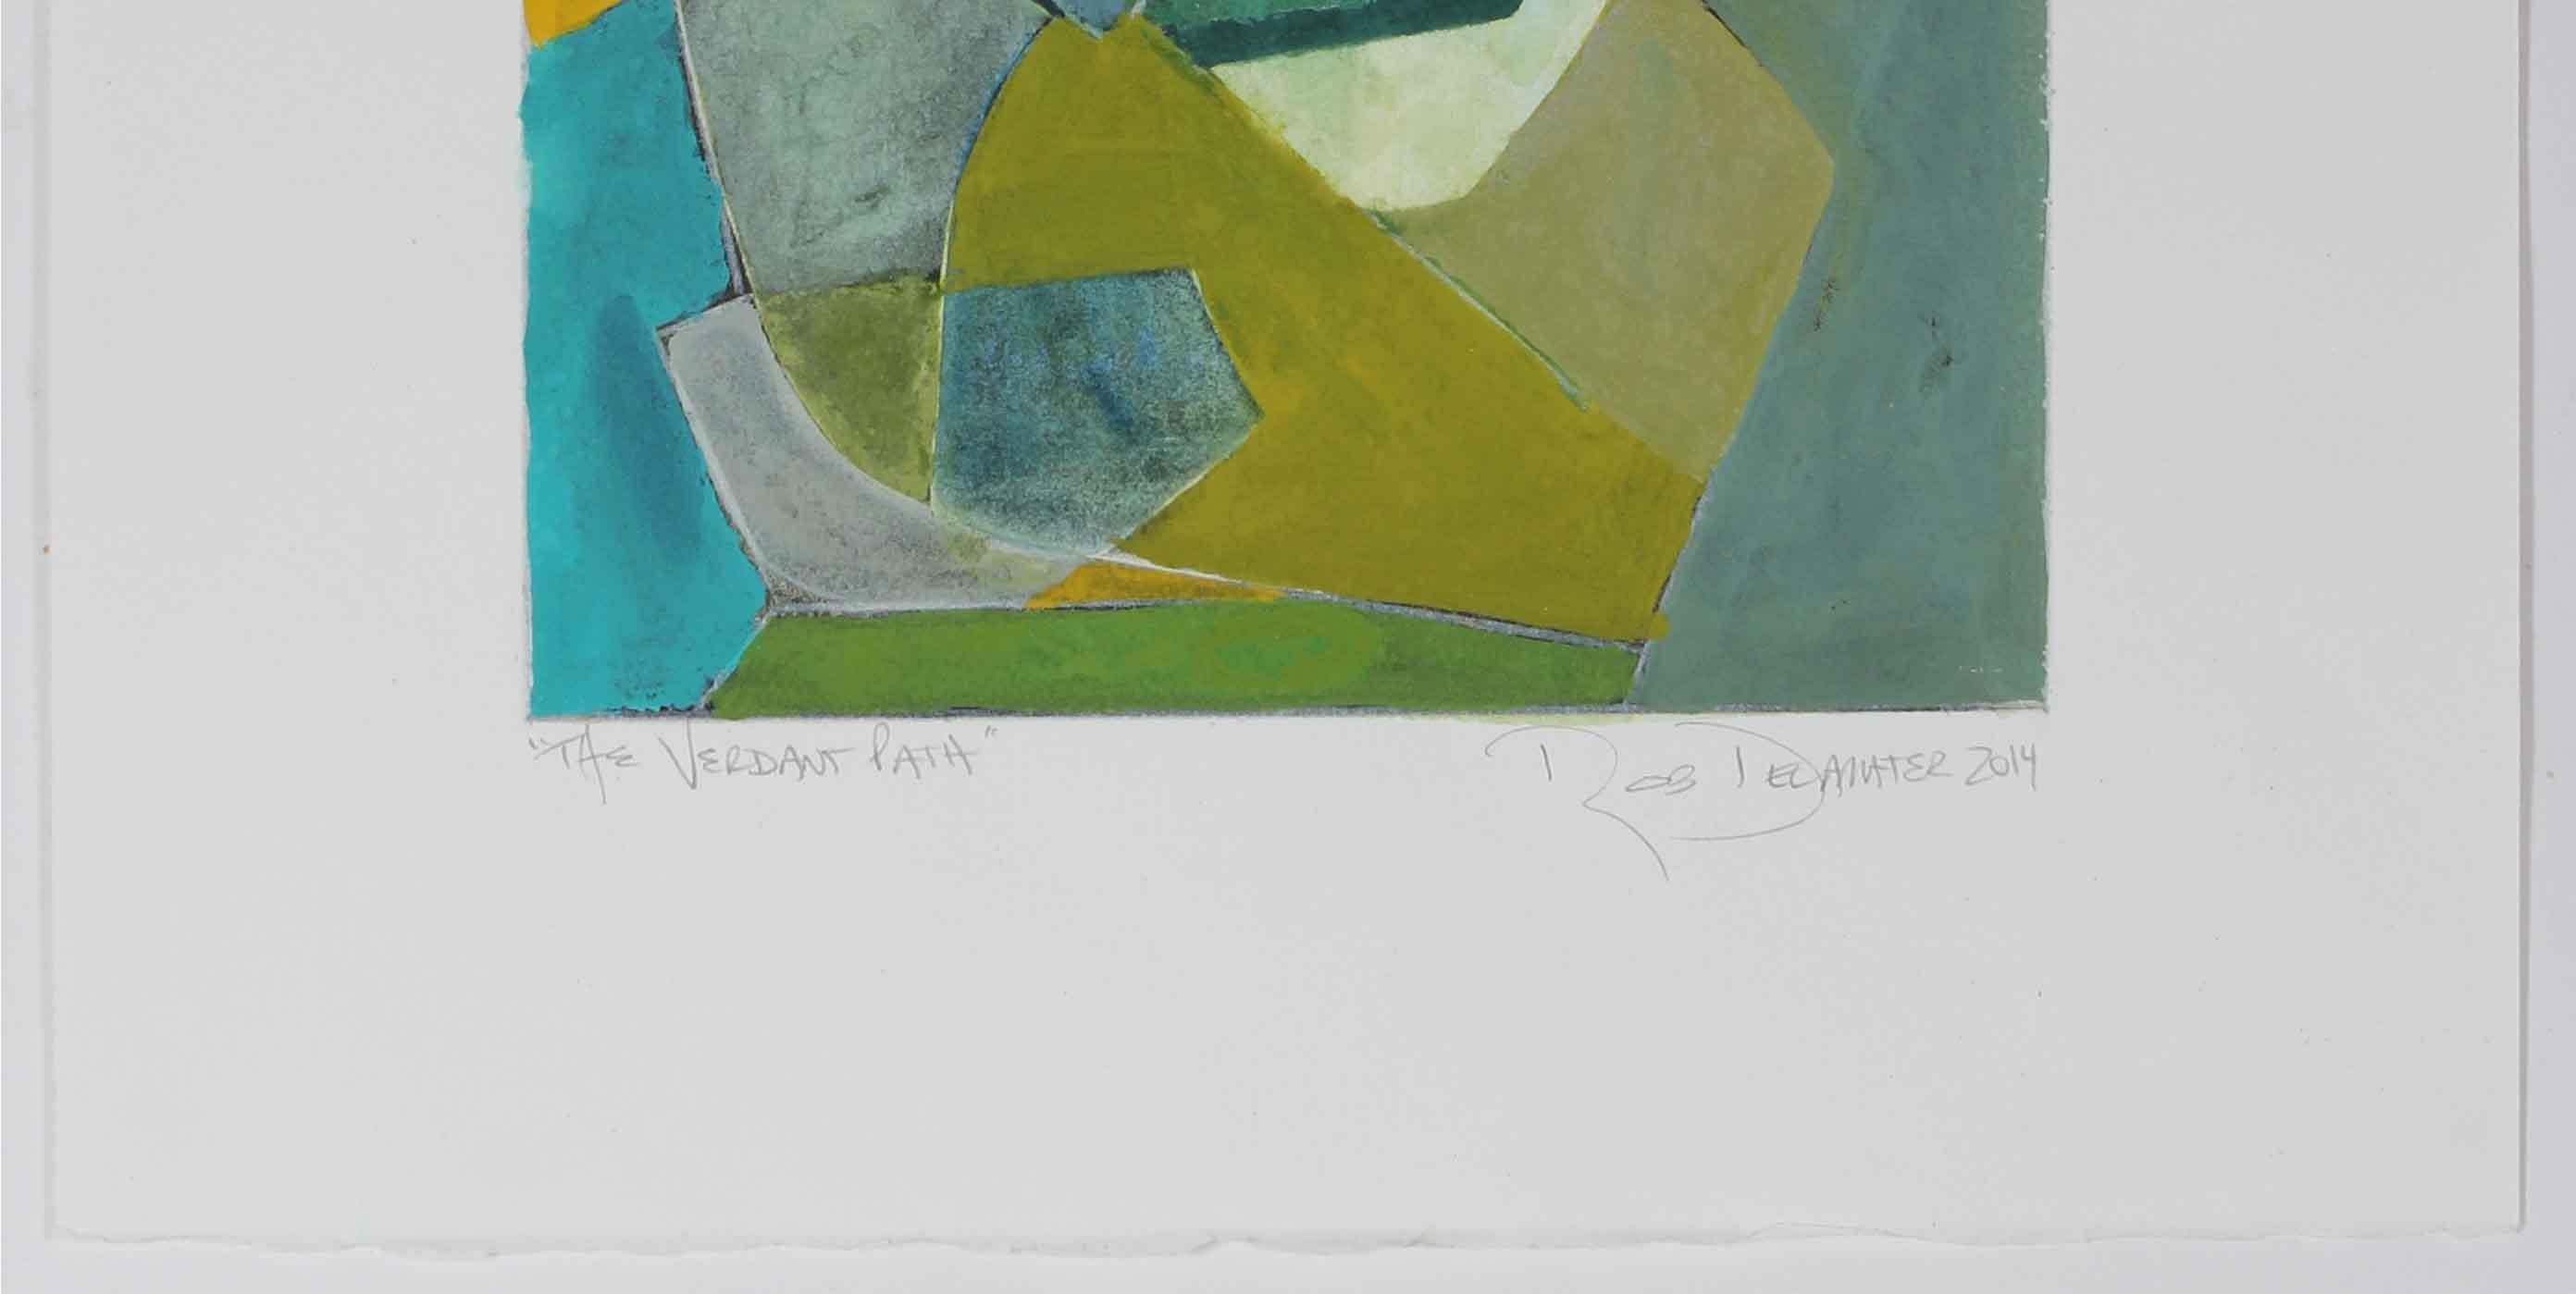 This 2014 gouache and ink on paper abstract with blue, yellow, and green entitled 